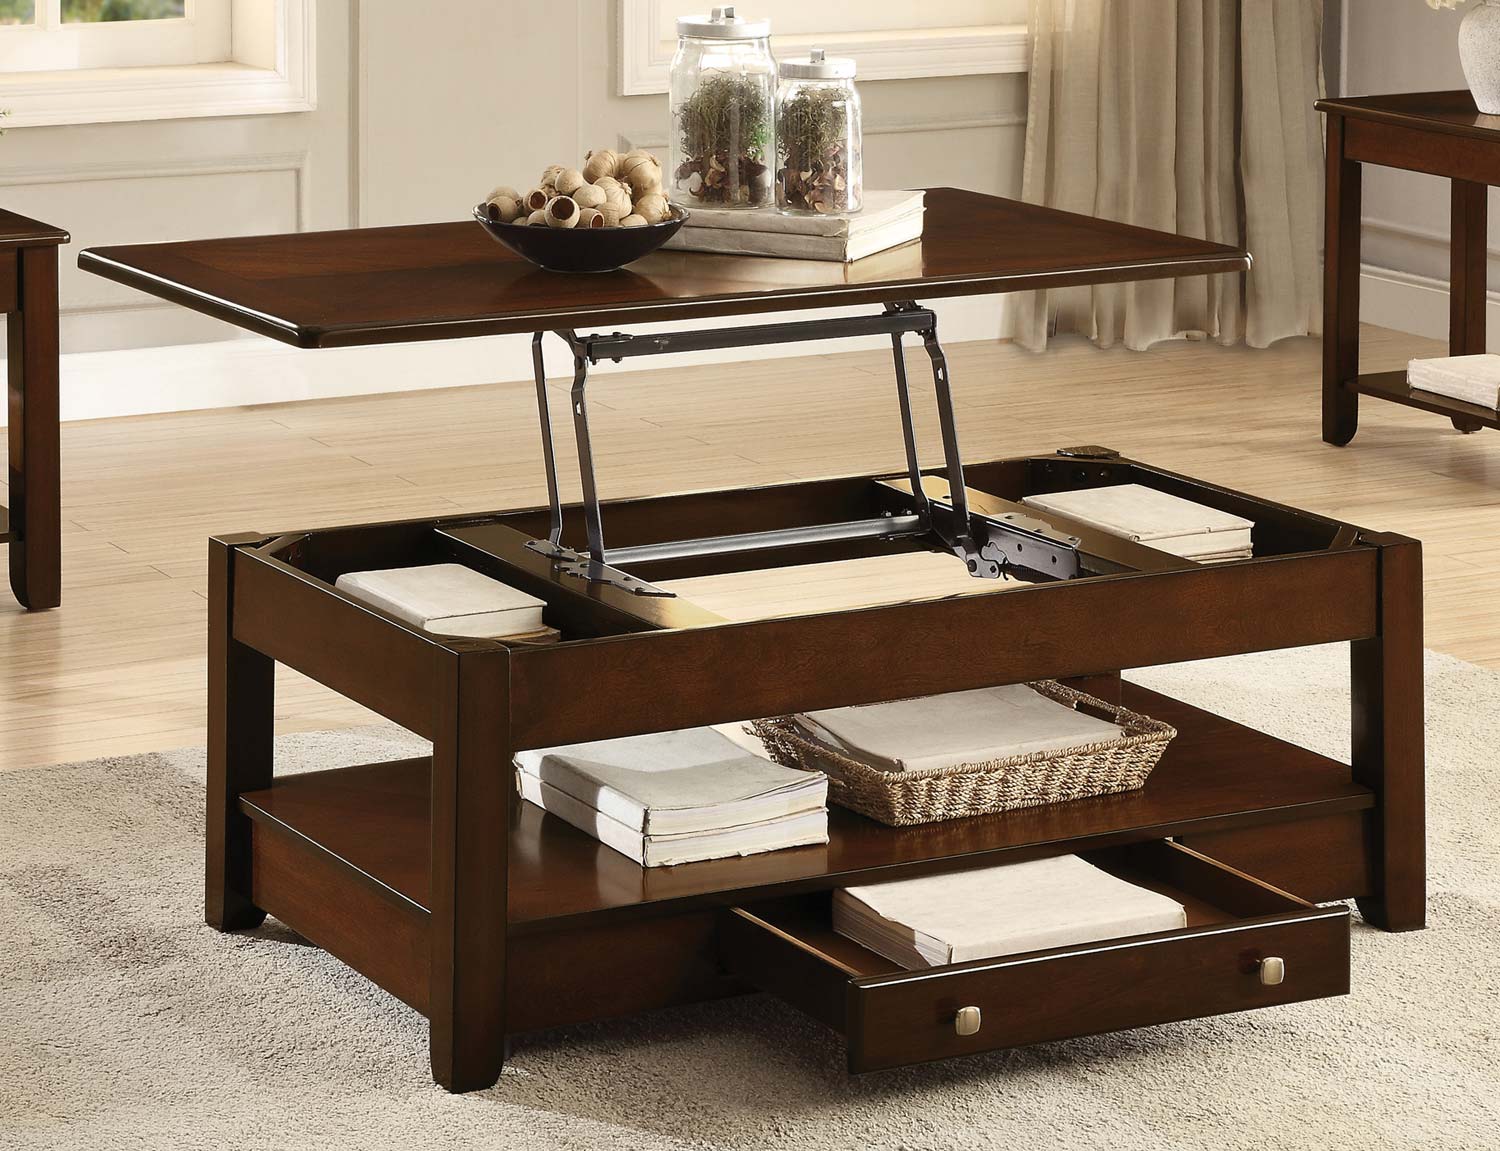 Homelegance Ballwin Cocktail Table with Lift Top and Functional Drawer on Casters - Deep Cherry